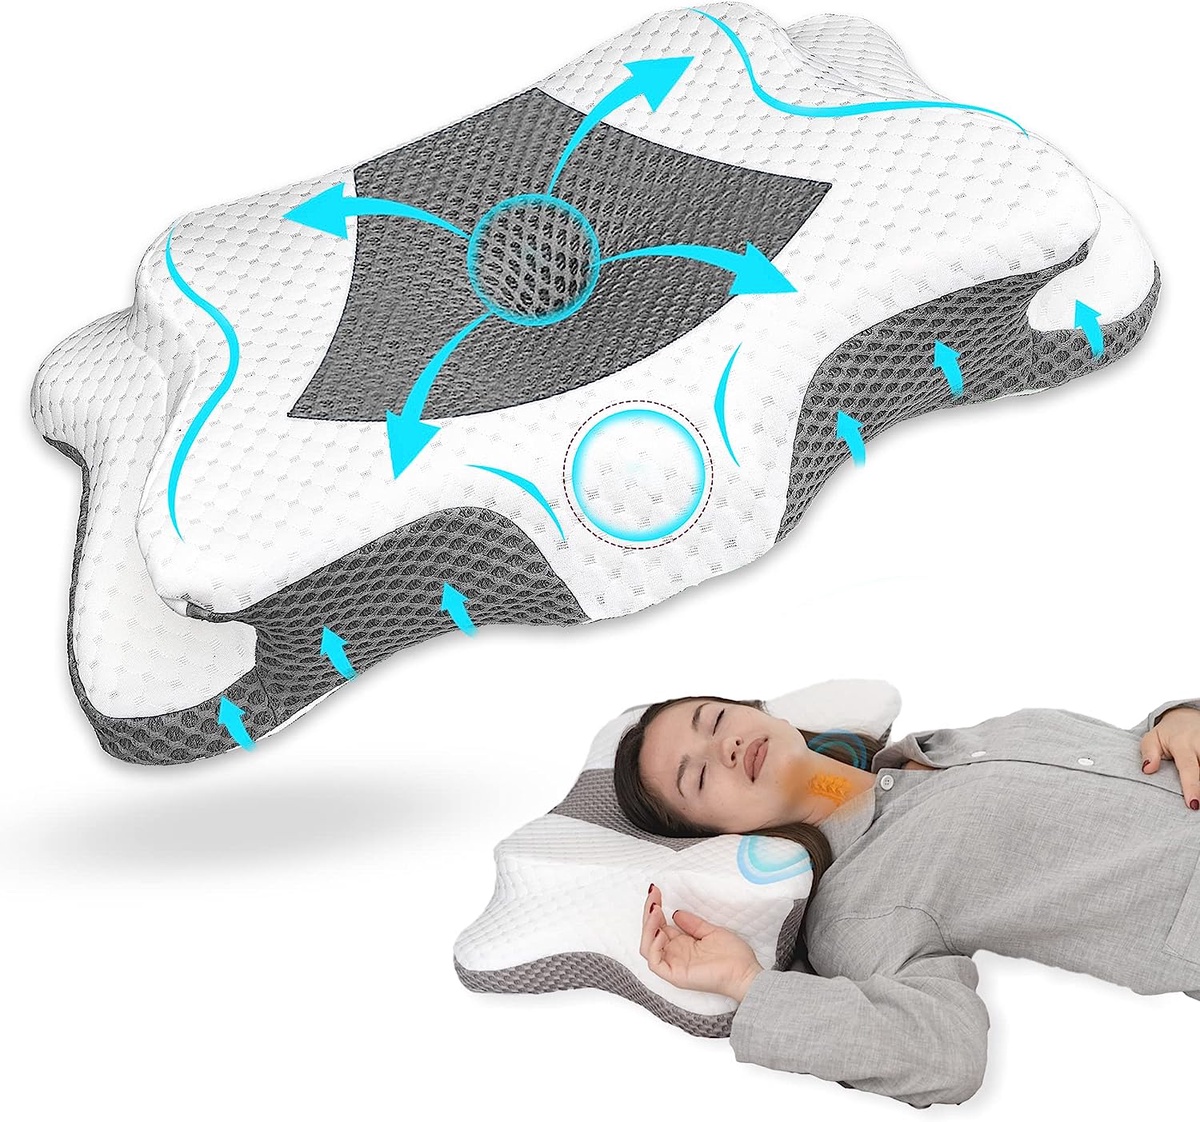 Find Your Perfect Zen Bloks Pillow for Neck Pain Relief - Now!